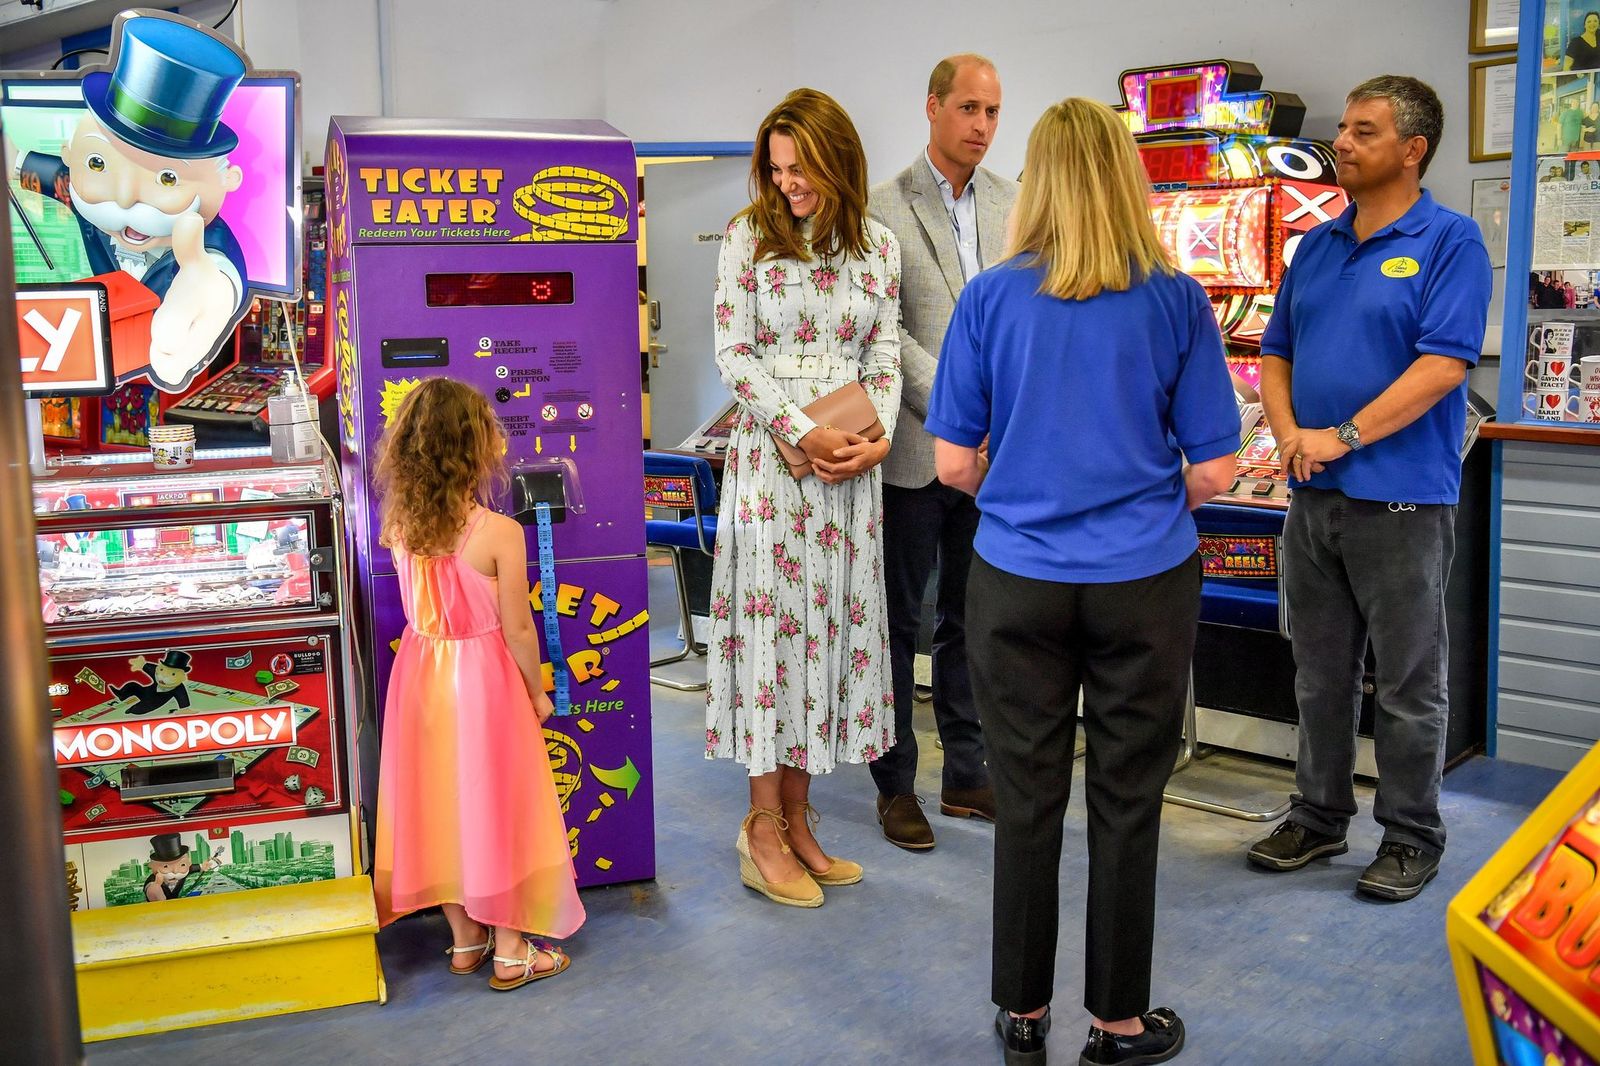 Duchess Kate and Prince William at Island Leisure Amusement Arcade during their visit to Barry Island, South Wales on August 5, 2020, in Barry, Wales | Photo: Ben Birchall - WPA Pool/Getty Images